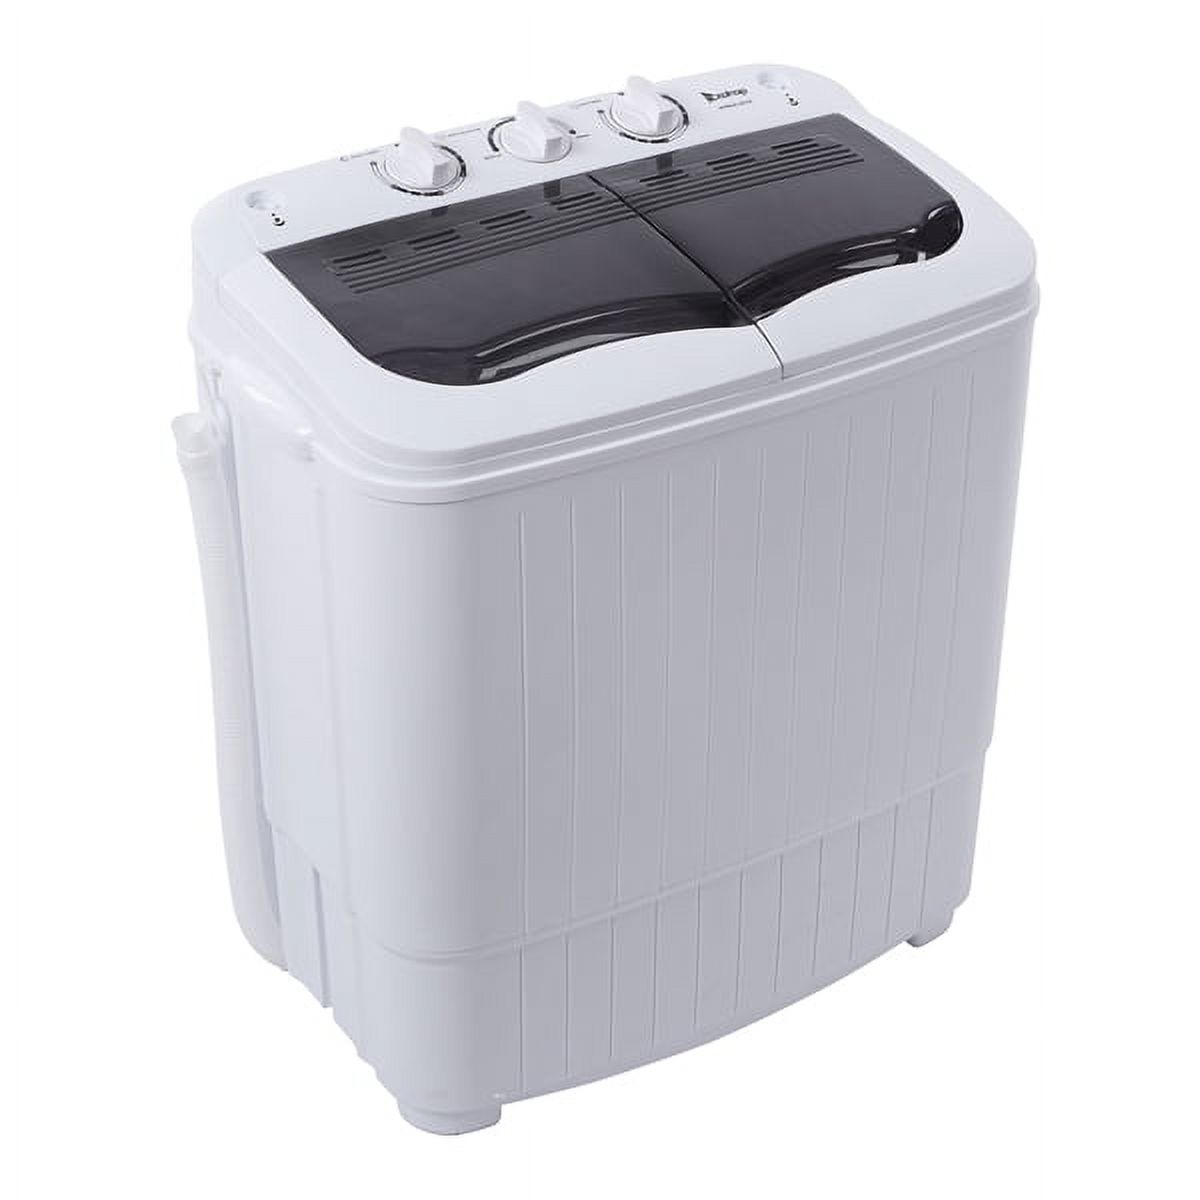 Washing Machine, Portable Clothes Washing Machines, 14.3lbs Wash,  Semi-Automatic Laundry Machine, Compact Washer for Apartment, Camping,  Dorms and RV